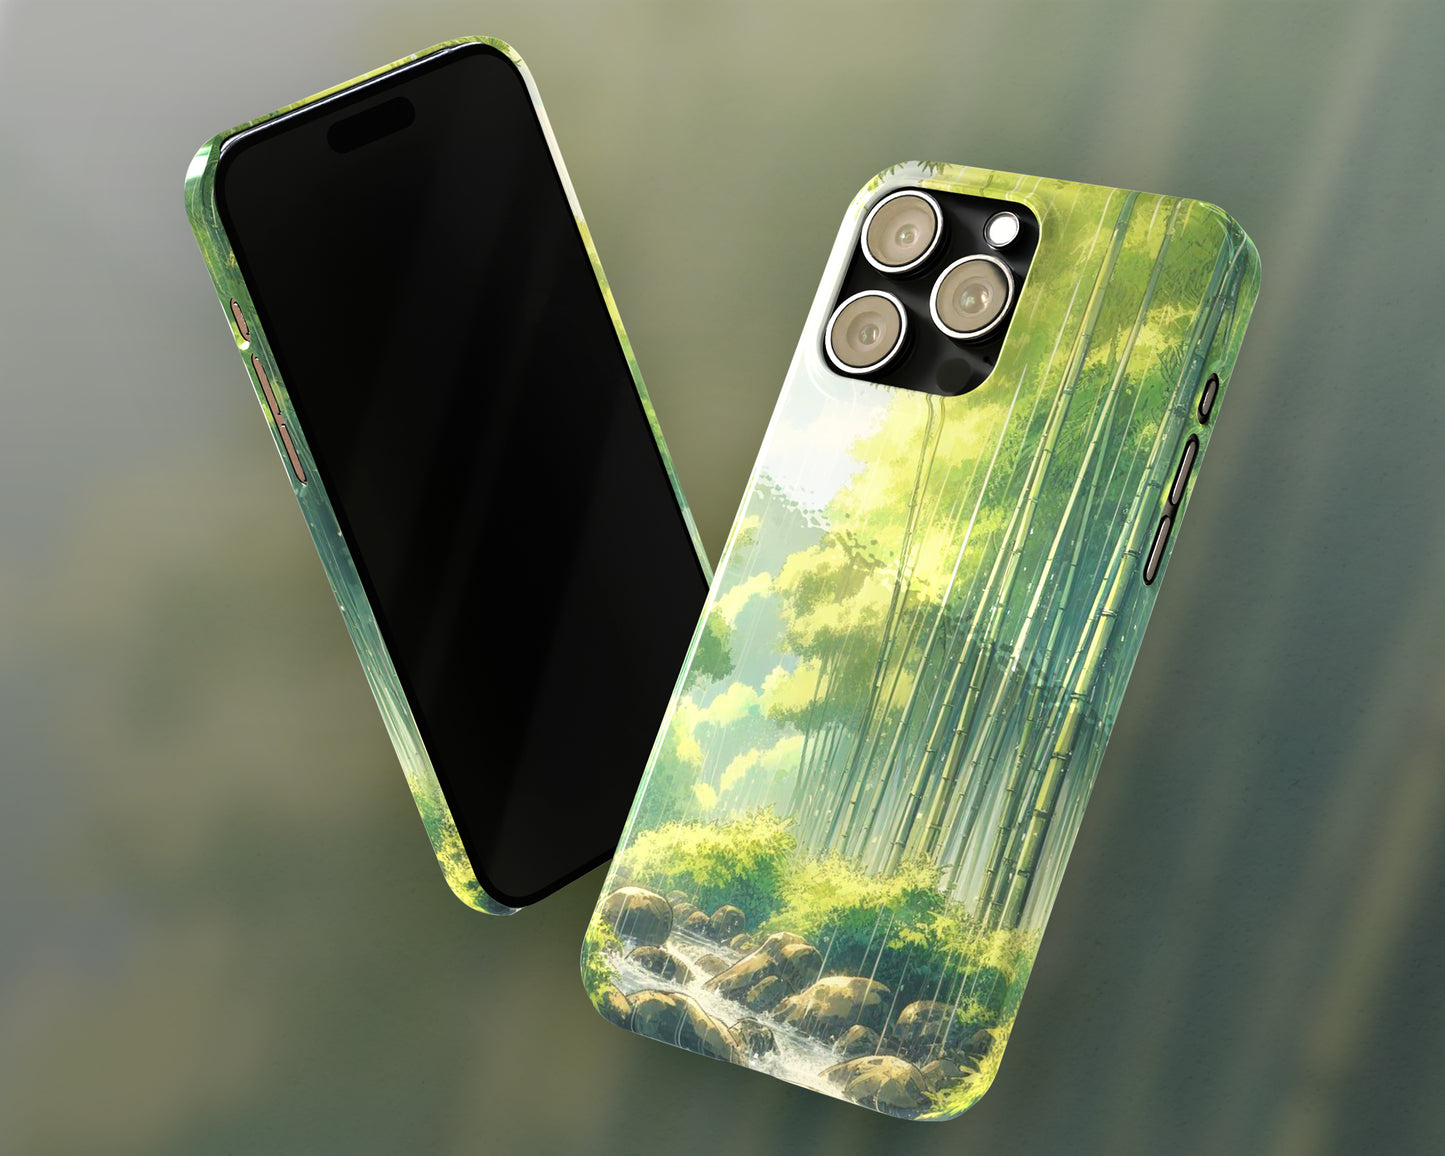 Bamboo forests in anime style iPhone case